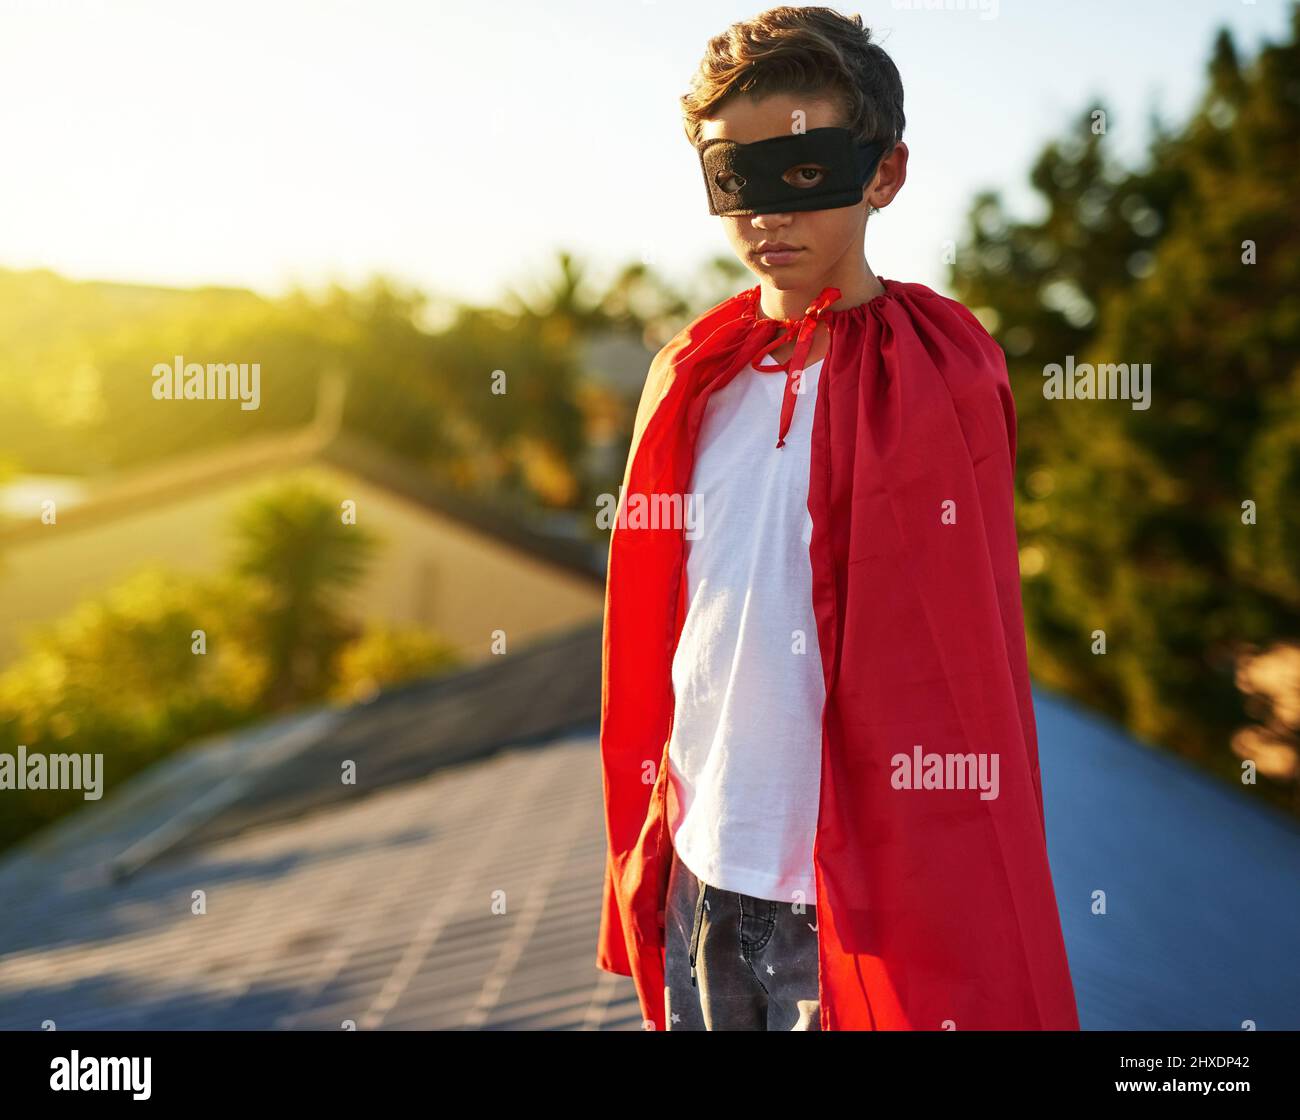 Watching over his neighbourhood. Portrait of a young boy in a cape and mask playing superhero outside. Stock Photo